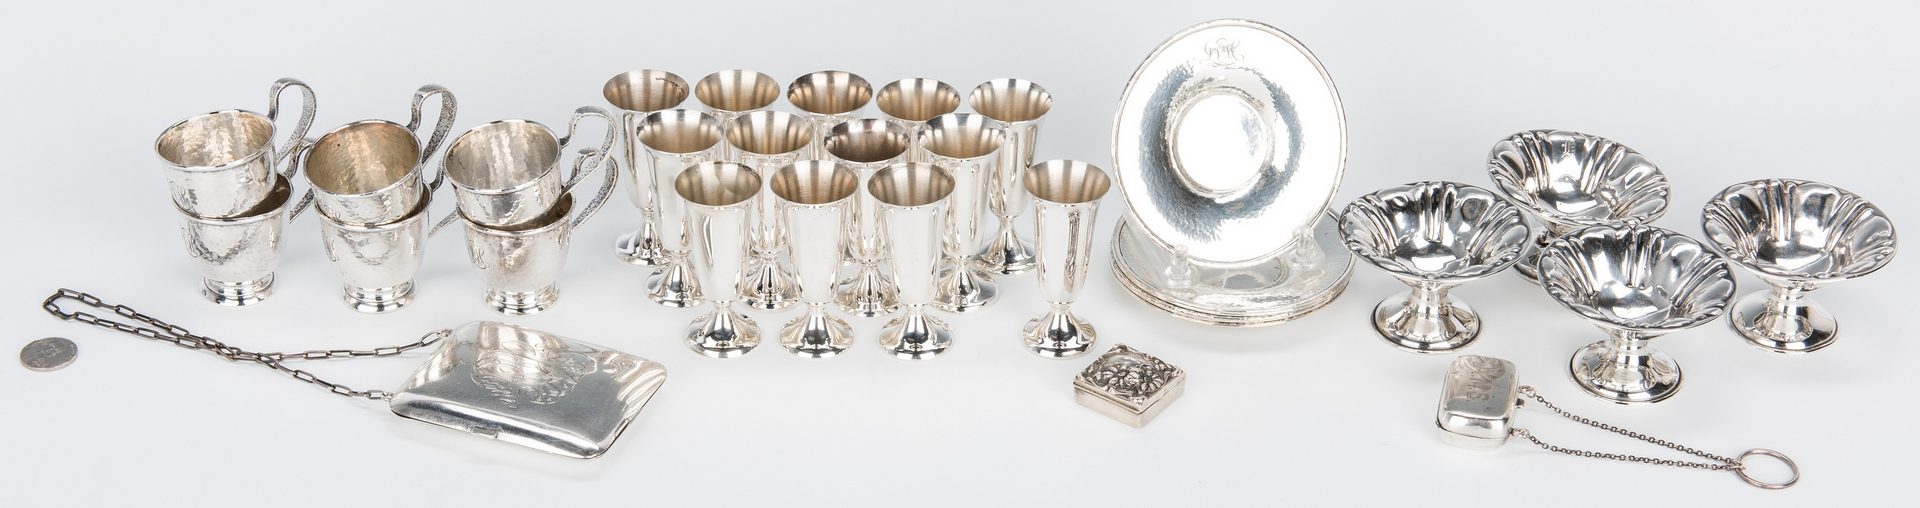 Lot 66:  Assorted Sterling Silver items, 31 pcs.